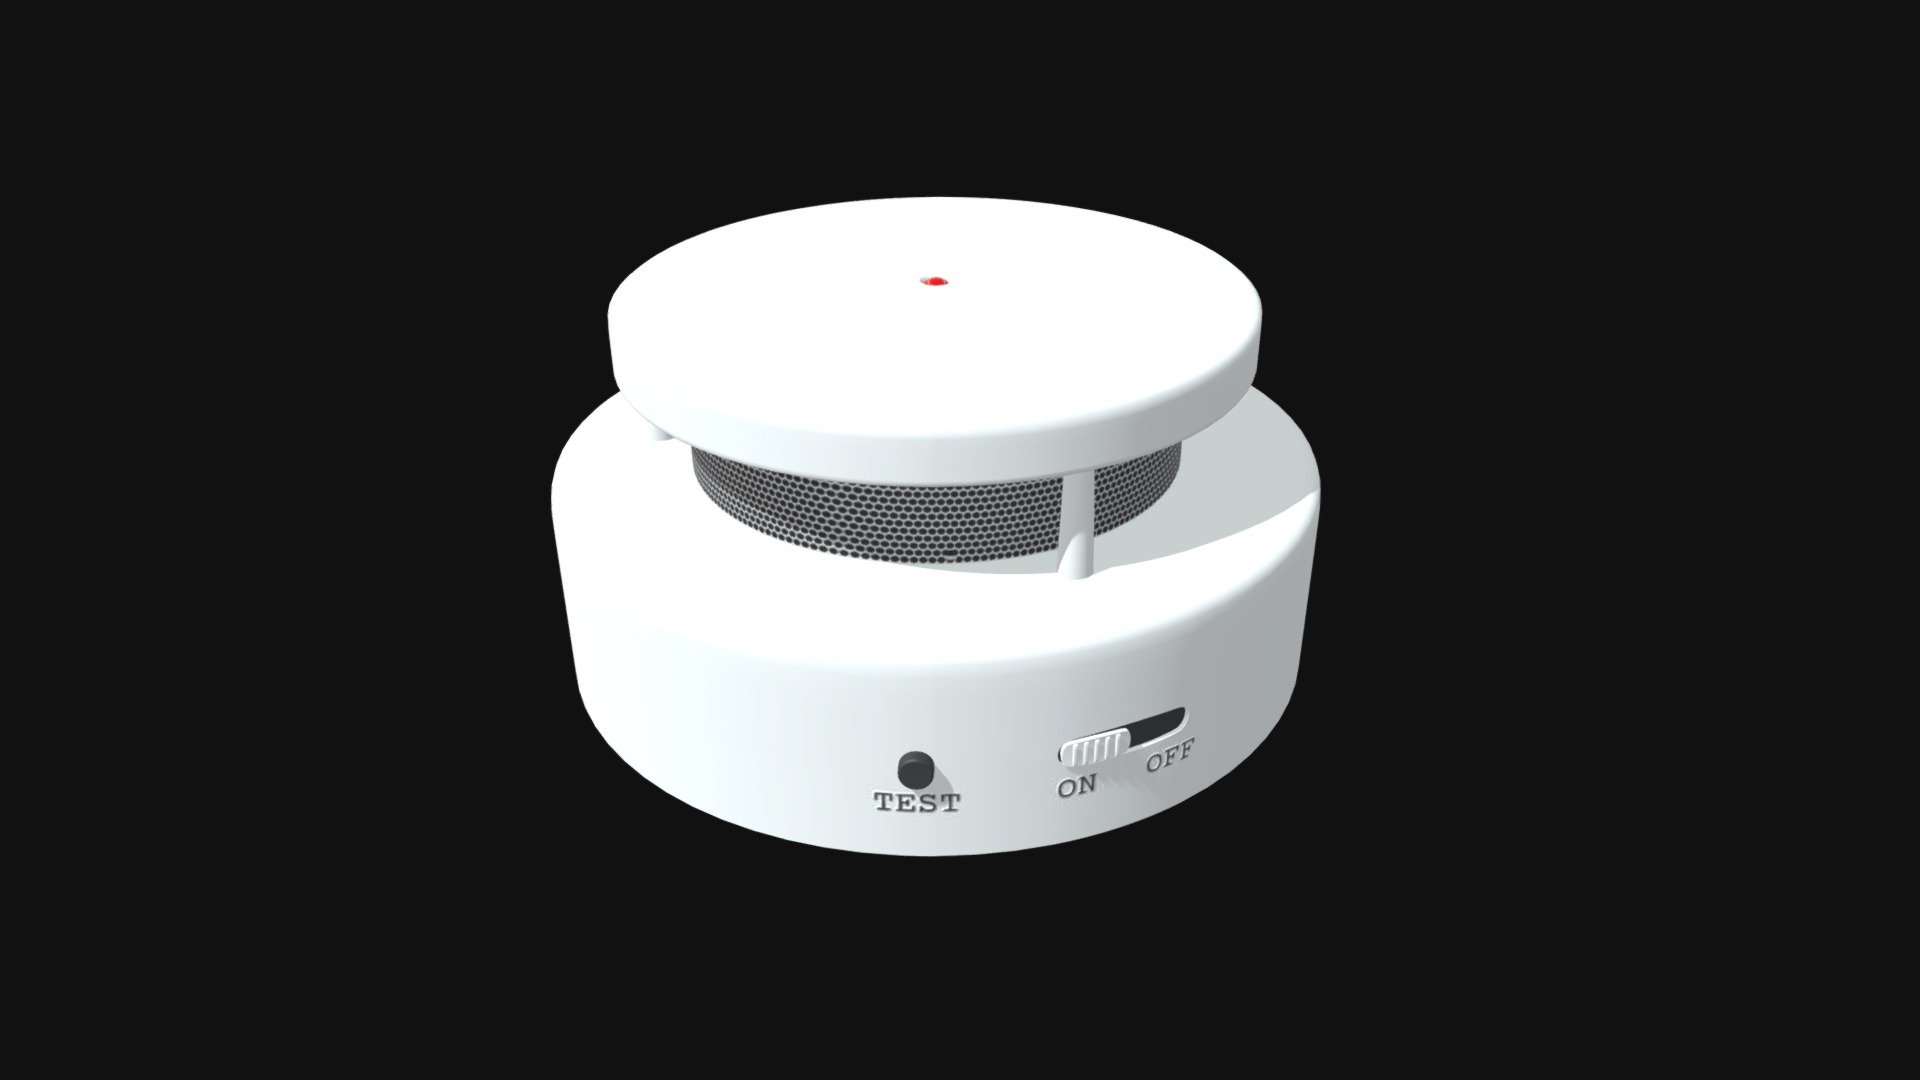 === The following description refers to the additional ZIP package provided with this model ===

Smoke detector alarm 3D Model. Production-ready 3D Model, with PBR materials, textures, non overlapping UV Layout map provided in the package.

Quads only geometries (no tris/ngons).

Formats included: FBX, OBJ; scenes: BLEND (with Cycles / Eevee PBR Materials and Textures); other: png with Alpha.

1 Object (mesh), 1 PBR Material, UV unwrapped (non overlapping UV Layout map provided in the package); UV-mapped Textures.

UV Layout maps and Image Textures resolutions: 2048x2048; PBR Textures made with Substance Painter.

Polygonal, QUADS ONLY (no tris/ngons); 14163 vertices, 14042 quad faces (28084 tris).

Real world dimensions; scene scale units: cm in Blender 3.1 (that is: Metric with 0.01 scale).

Uniform scale object (scale applied in Blender 3.1) 3d model